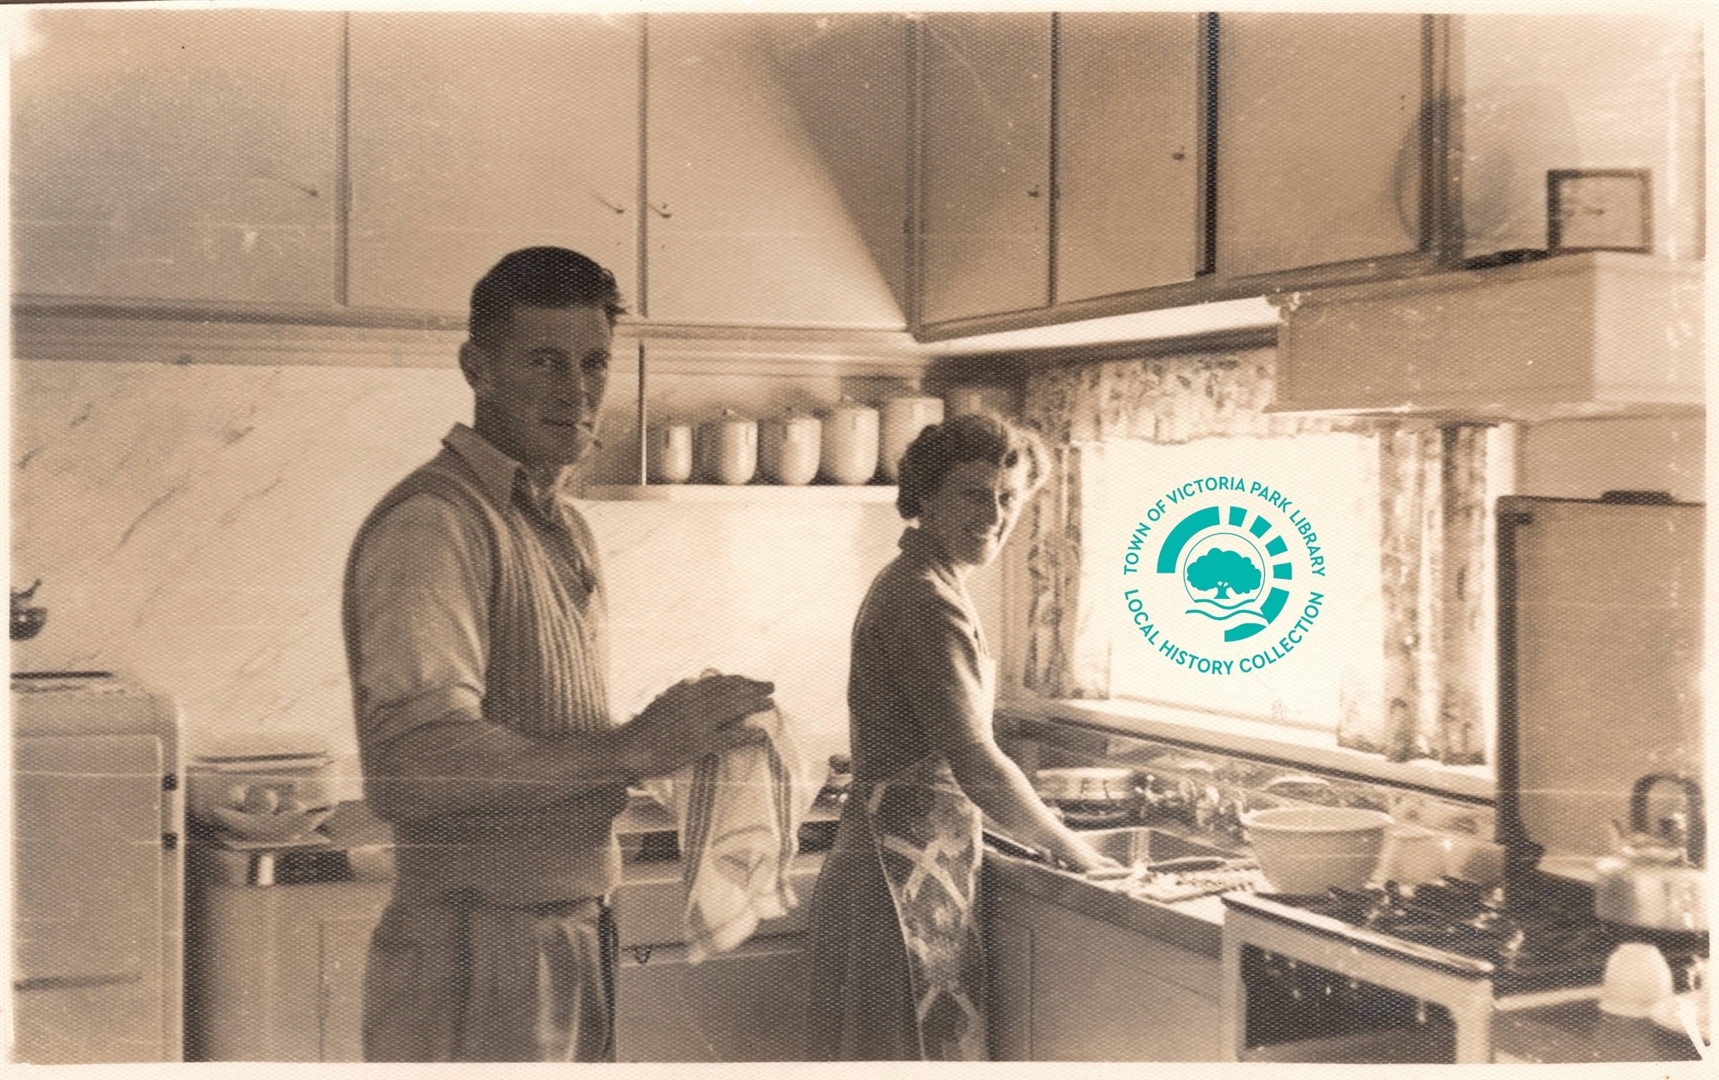 PH00043-10 Ken & Irene Stewart doing dishes, 107 Westminster St, May 1953 Image